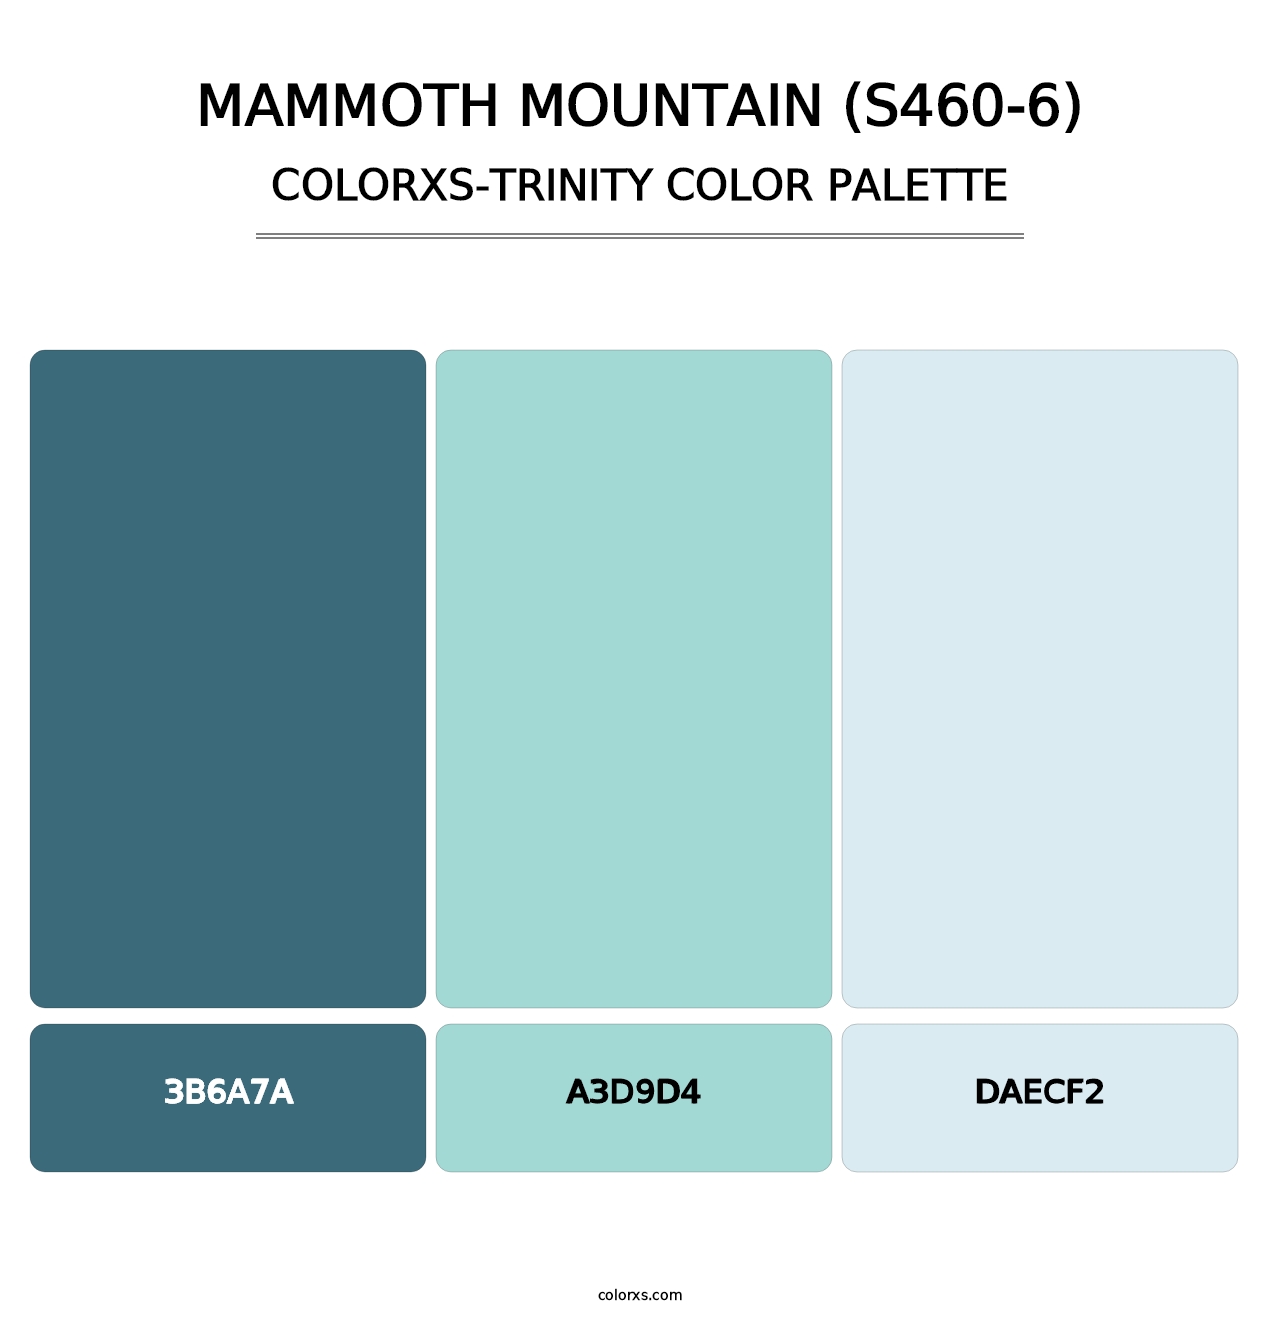 Mammoth Mountain (S460-6) - Colorxs Trinity Palette